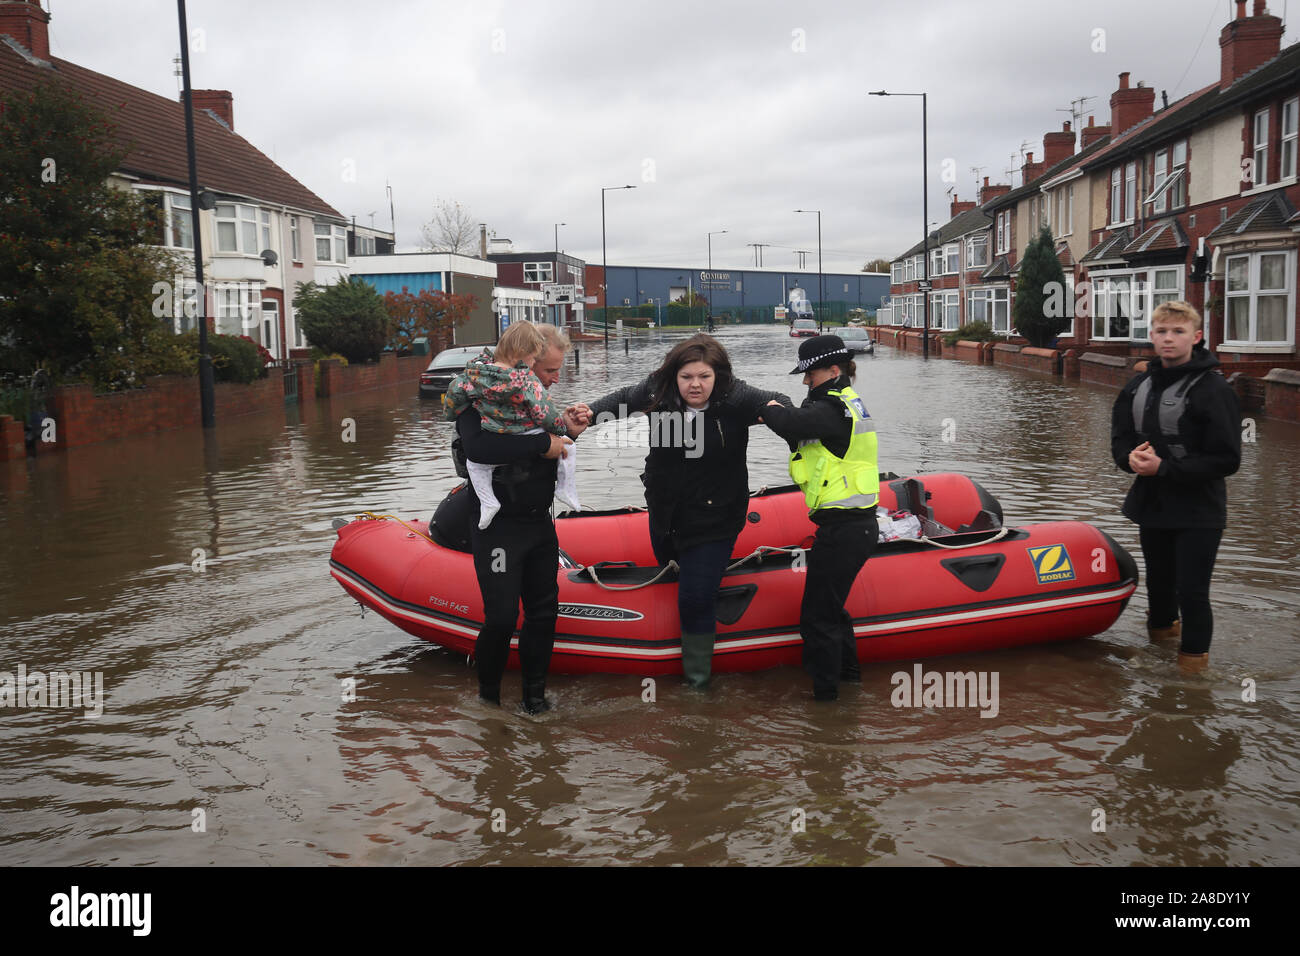 A woman is pulled from an inflatable boat that has been used to rescue residents trapped by floodwater in Doncaster, Yorkshire, as parts of England endured a month's worth of rain in 24 hours, with scores of people rescued or forced to evacuate their homes, others stranded overnight in a shopping centre, and travel plans thrown into chaos. Stock Photo